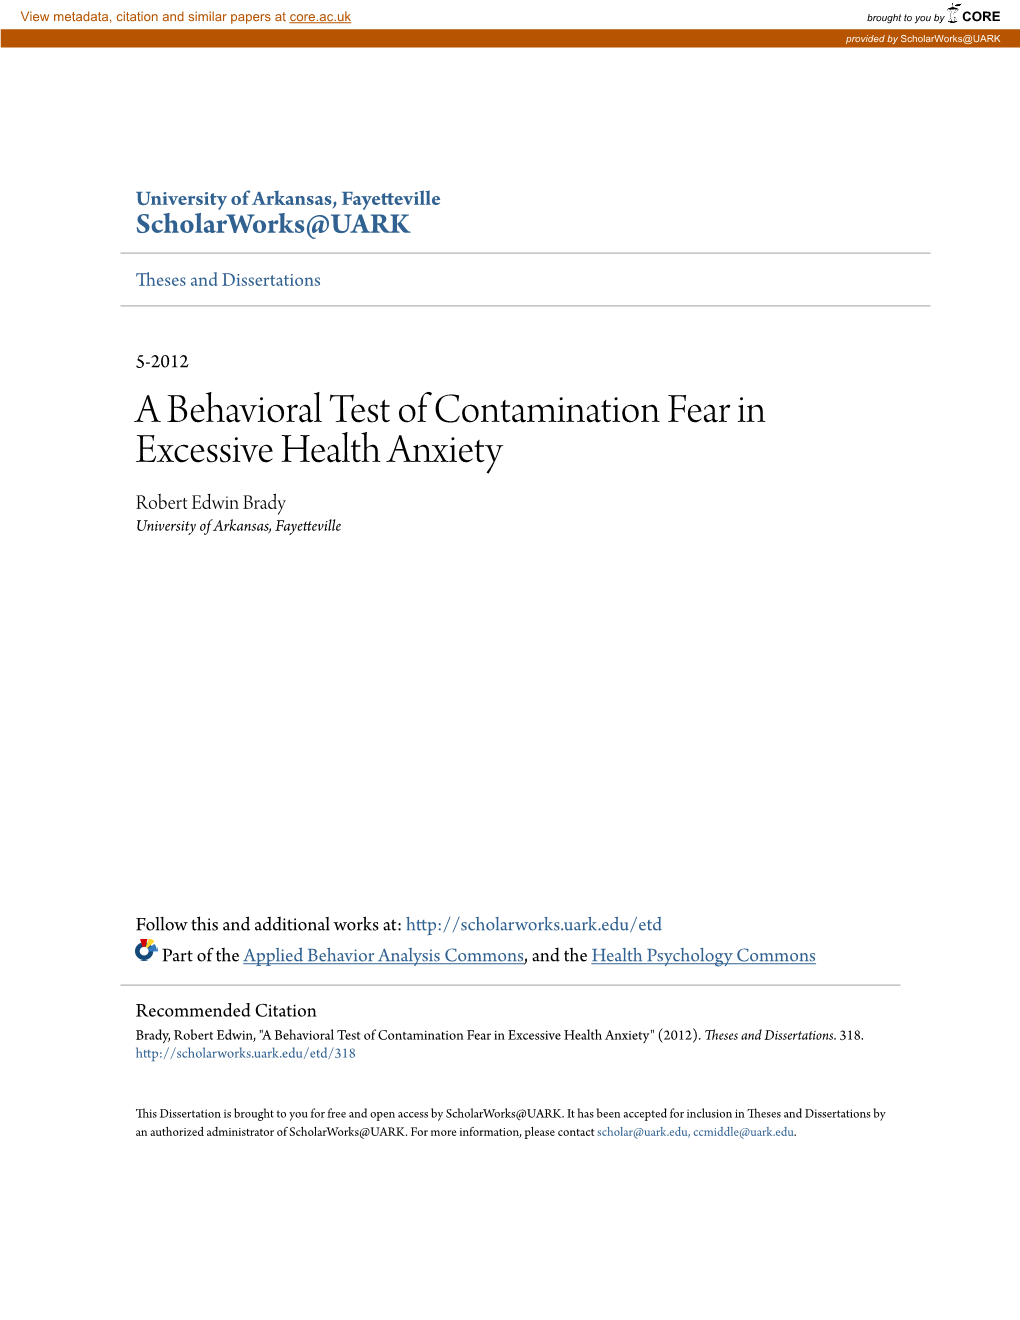 A Behavioral Test of Contamination Fear in Excessive Health Anxiety Robert Edwin Brady University of Arkansas, Fayetteville